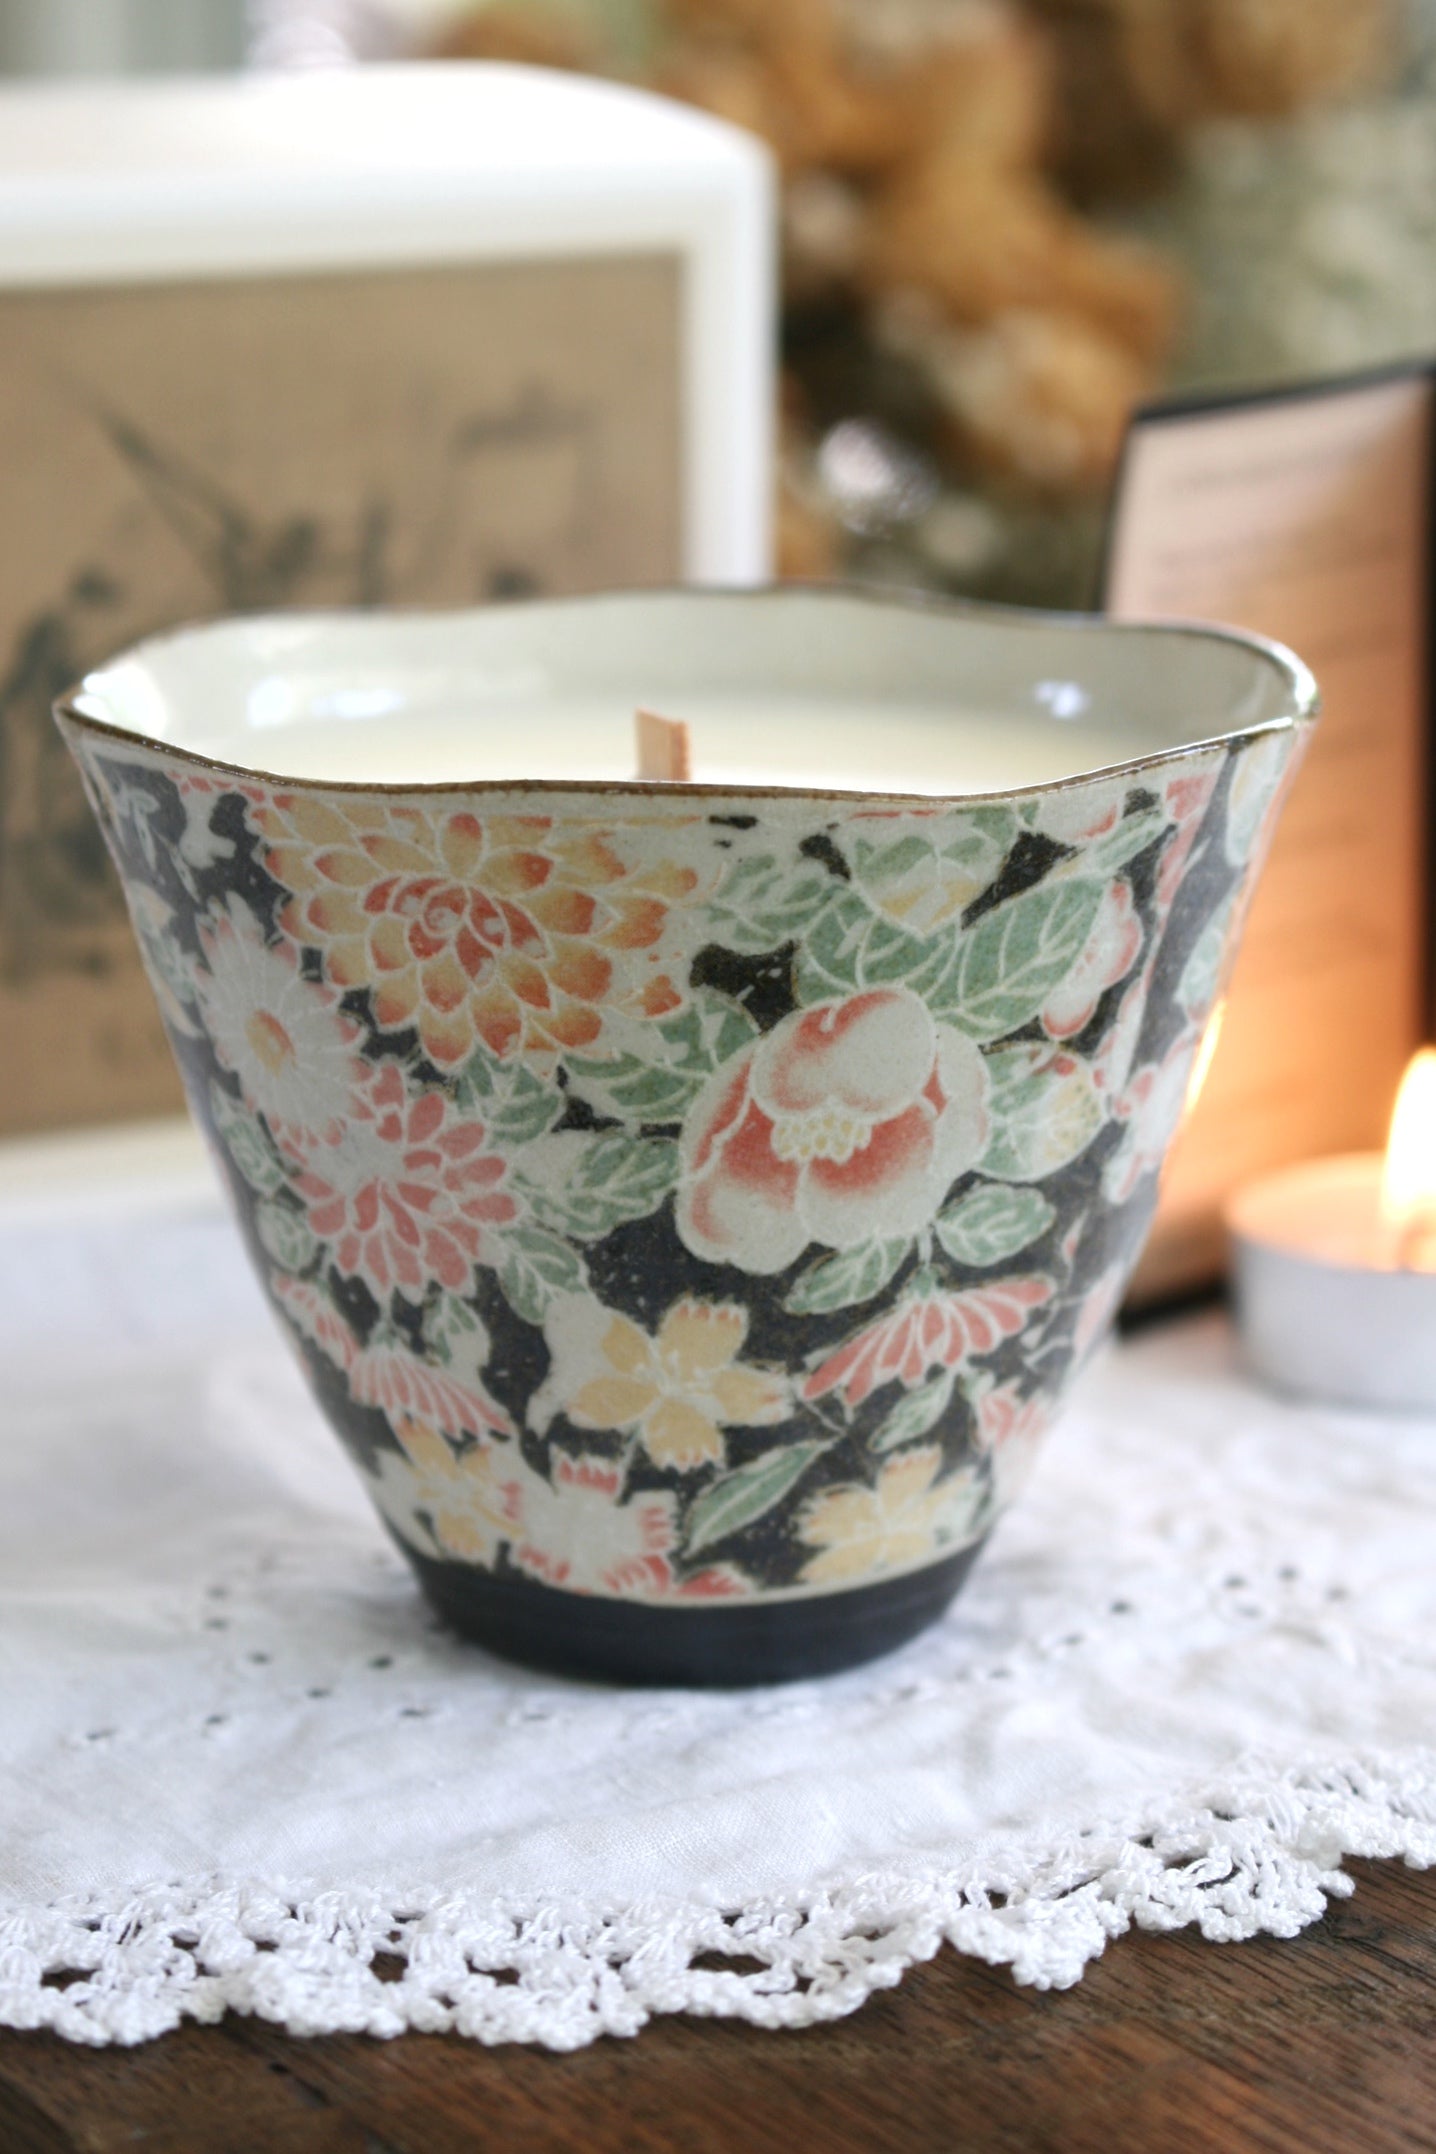 Aromatherapy Teacup Candle - 100% Pure Essential Oils - Soy Wax - Wood Wick - Australia